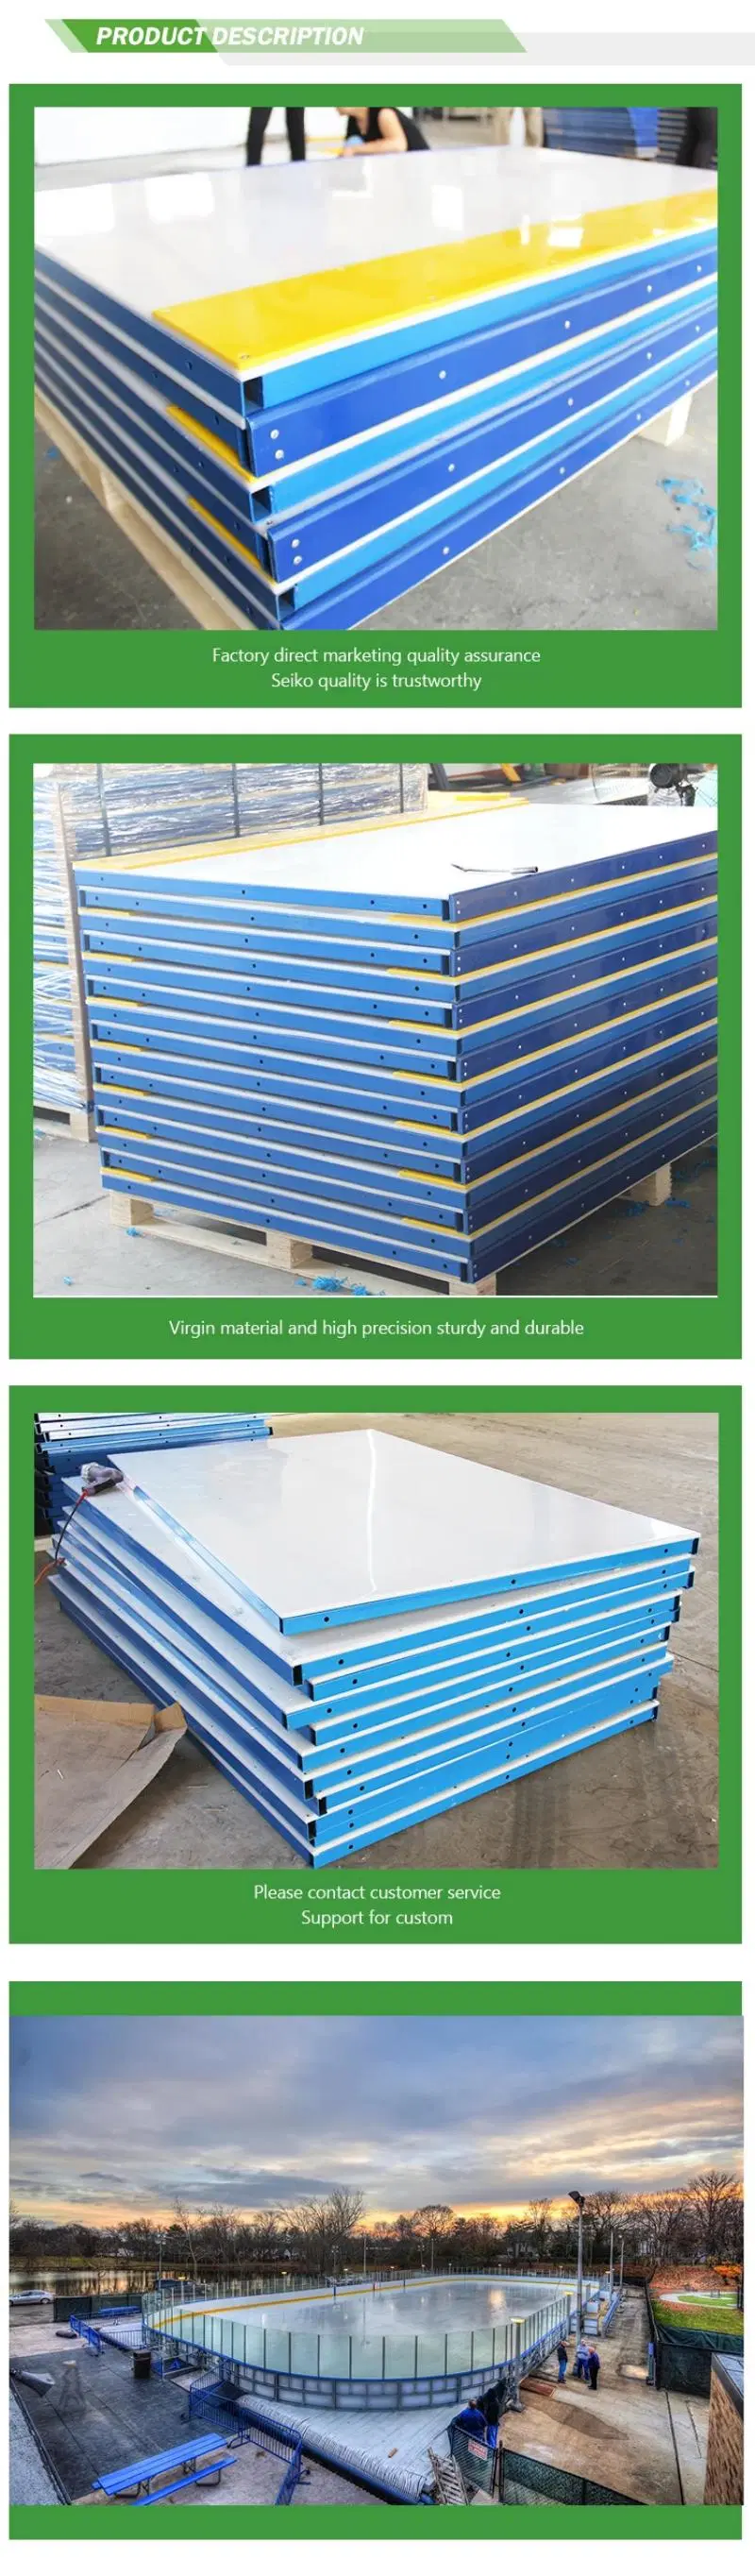 HDPE Shooting Pad Practice Hockey Slide Board UHMWPE Sheet for Ice Skating Rinks Price